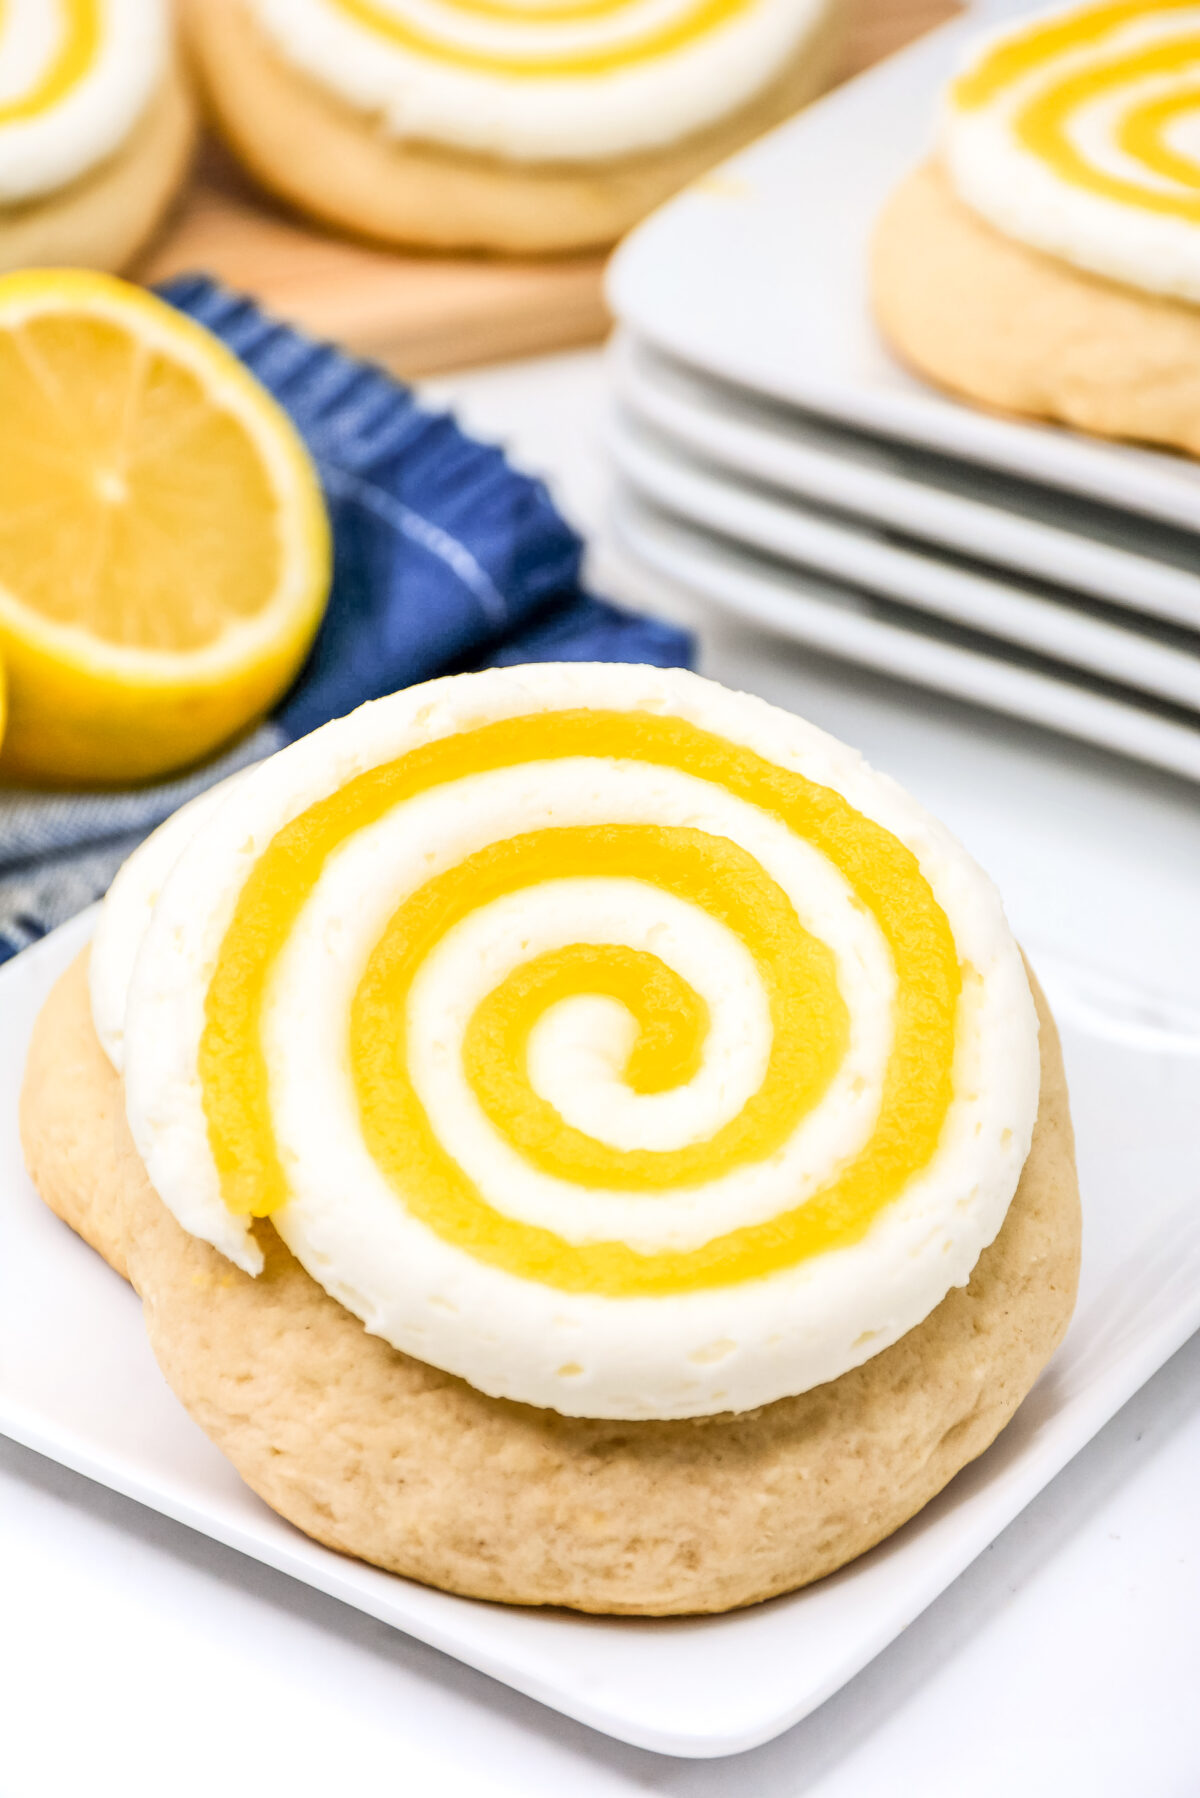 Do you like Crumbl cookies? Try these copycat Crumbl lemon chiffon cookies with a lemon cream cheese frosting swirled with lemon curd.